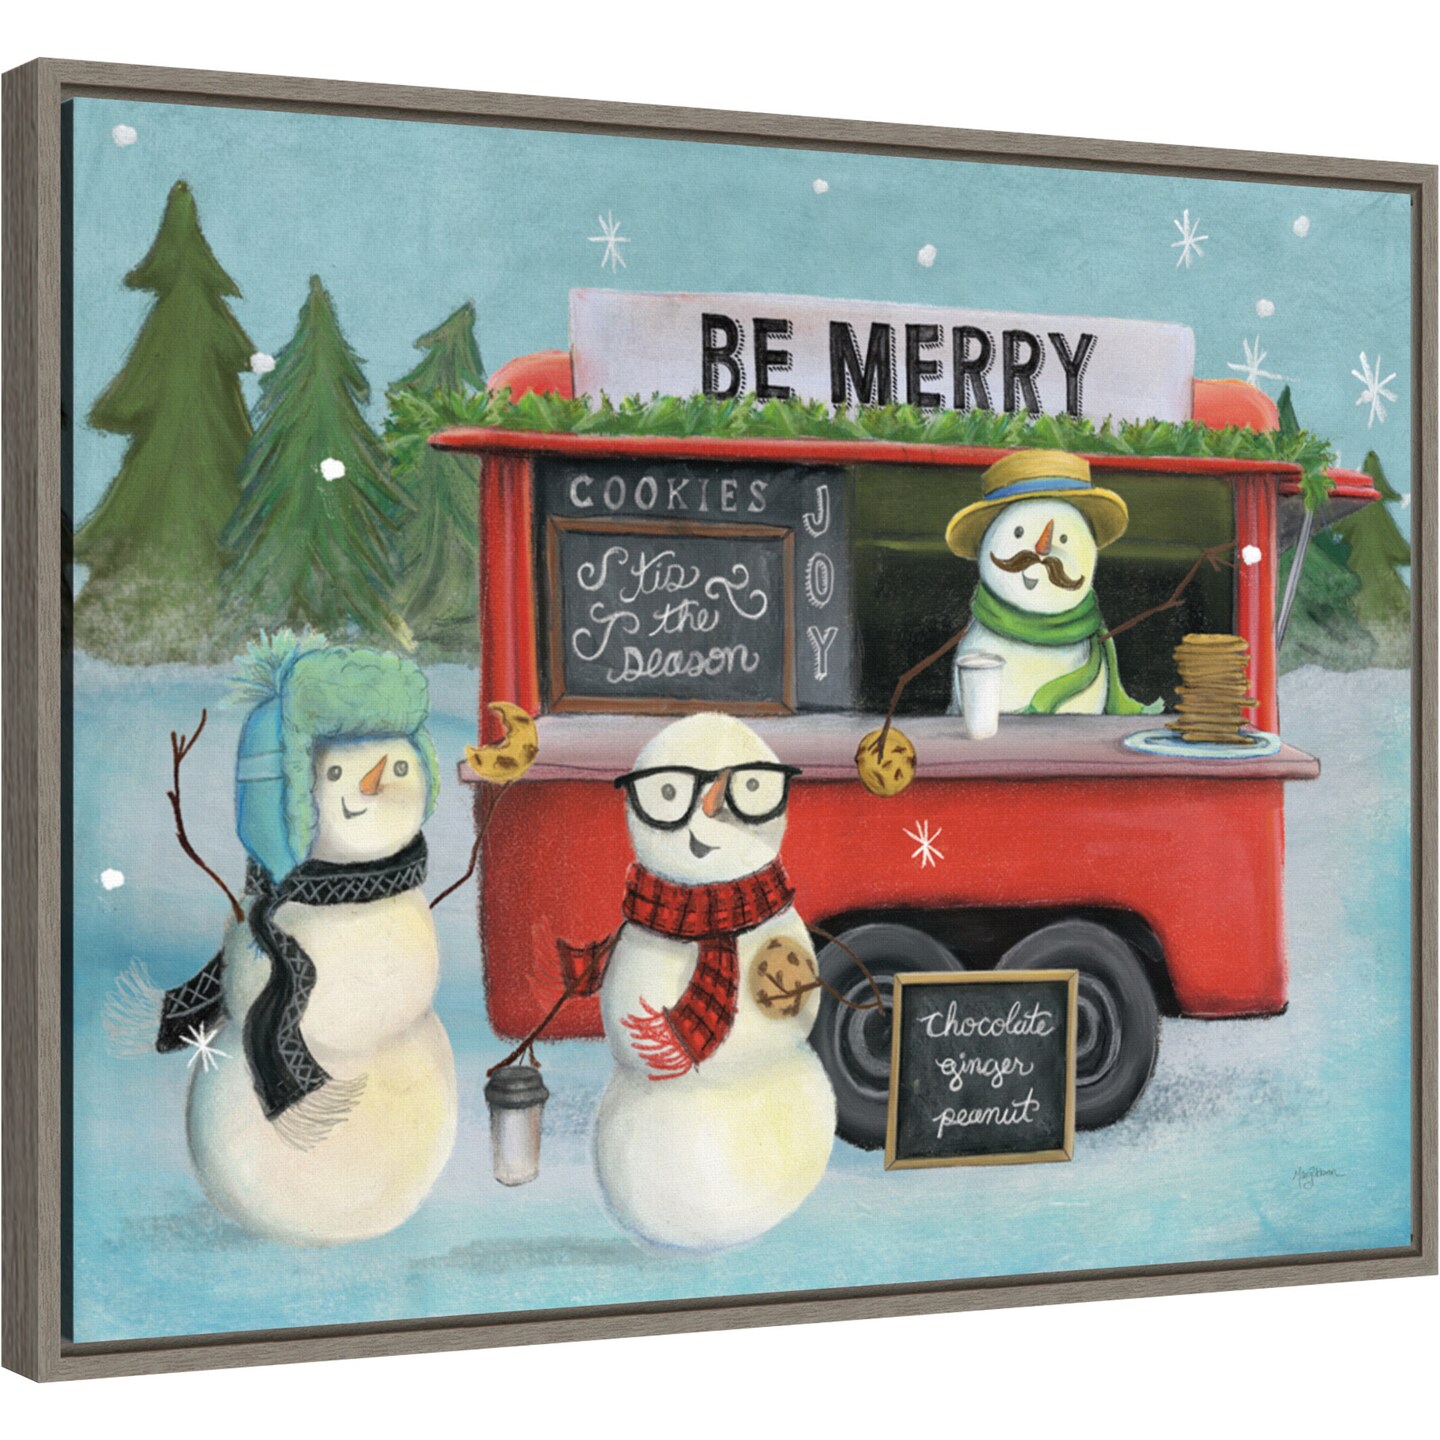 Christmas on wheels III by Mary Urban 24-in. W x 18-in. H. Canvas Wall Art Print Framed in Grey